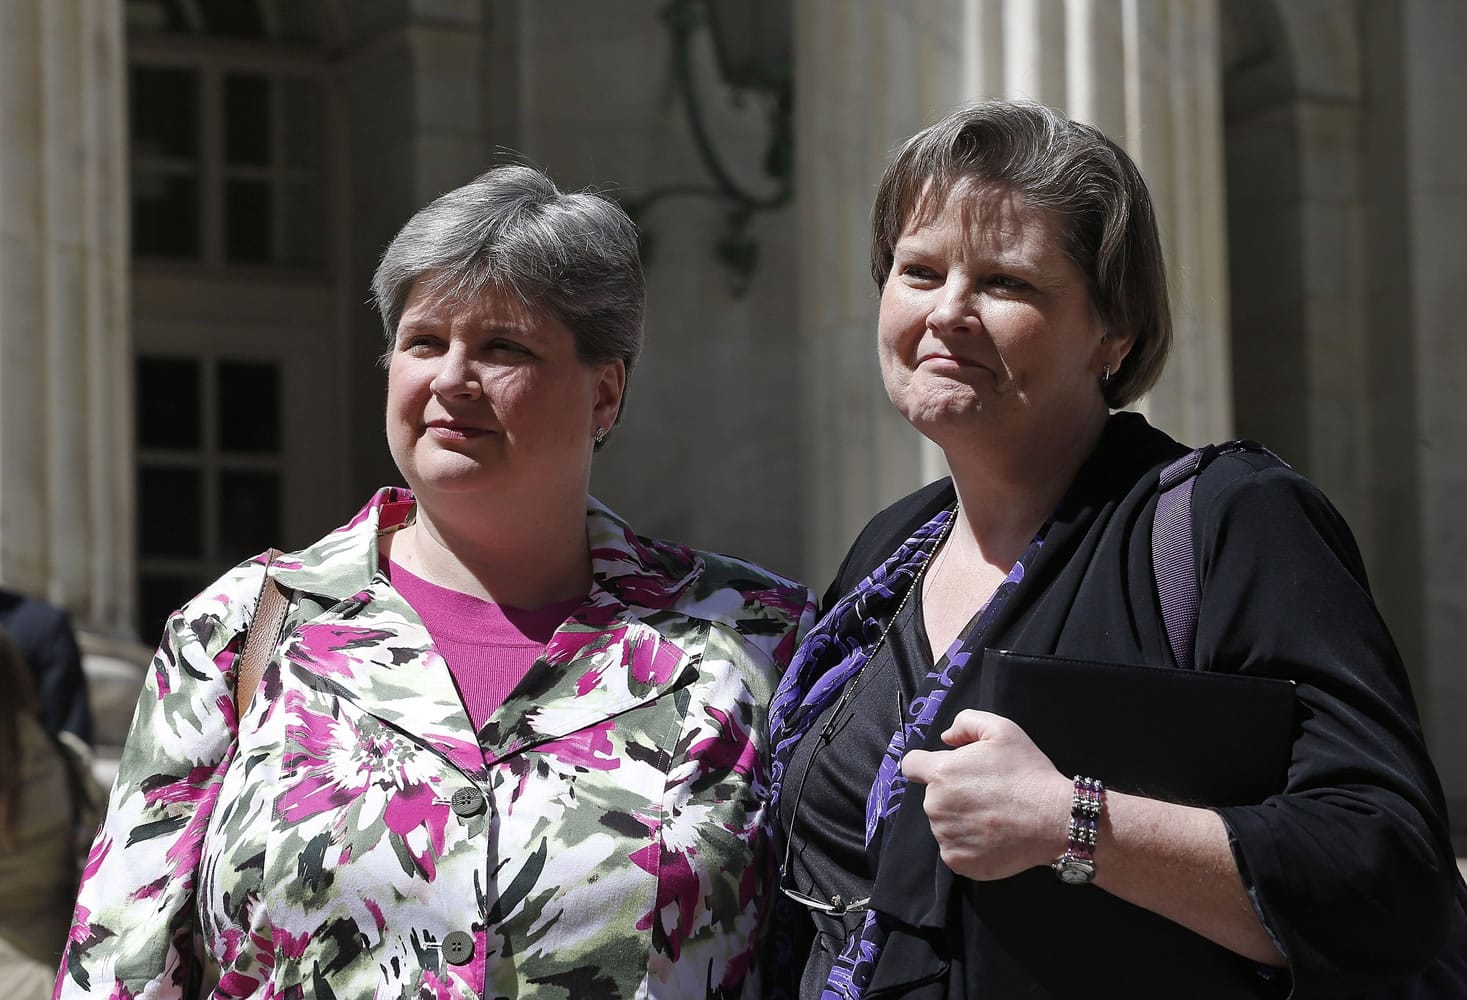 Plaintiffs challenging Oklahoma's gay marriage ban Sharon Baldwin, left, and her partner, Mary Bishop, leave court April 17 following a hearing at the 10th U.S. Circuit Court of Appeals in Denver. The three-judge panel of the 10th U.S. Circuit Court of Appeals in Denver today found a ban on same-sex marriage in Oklahoma violates the U.S. Constitution.